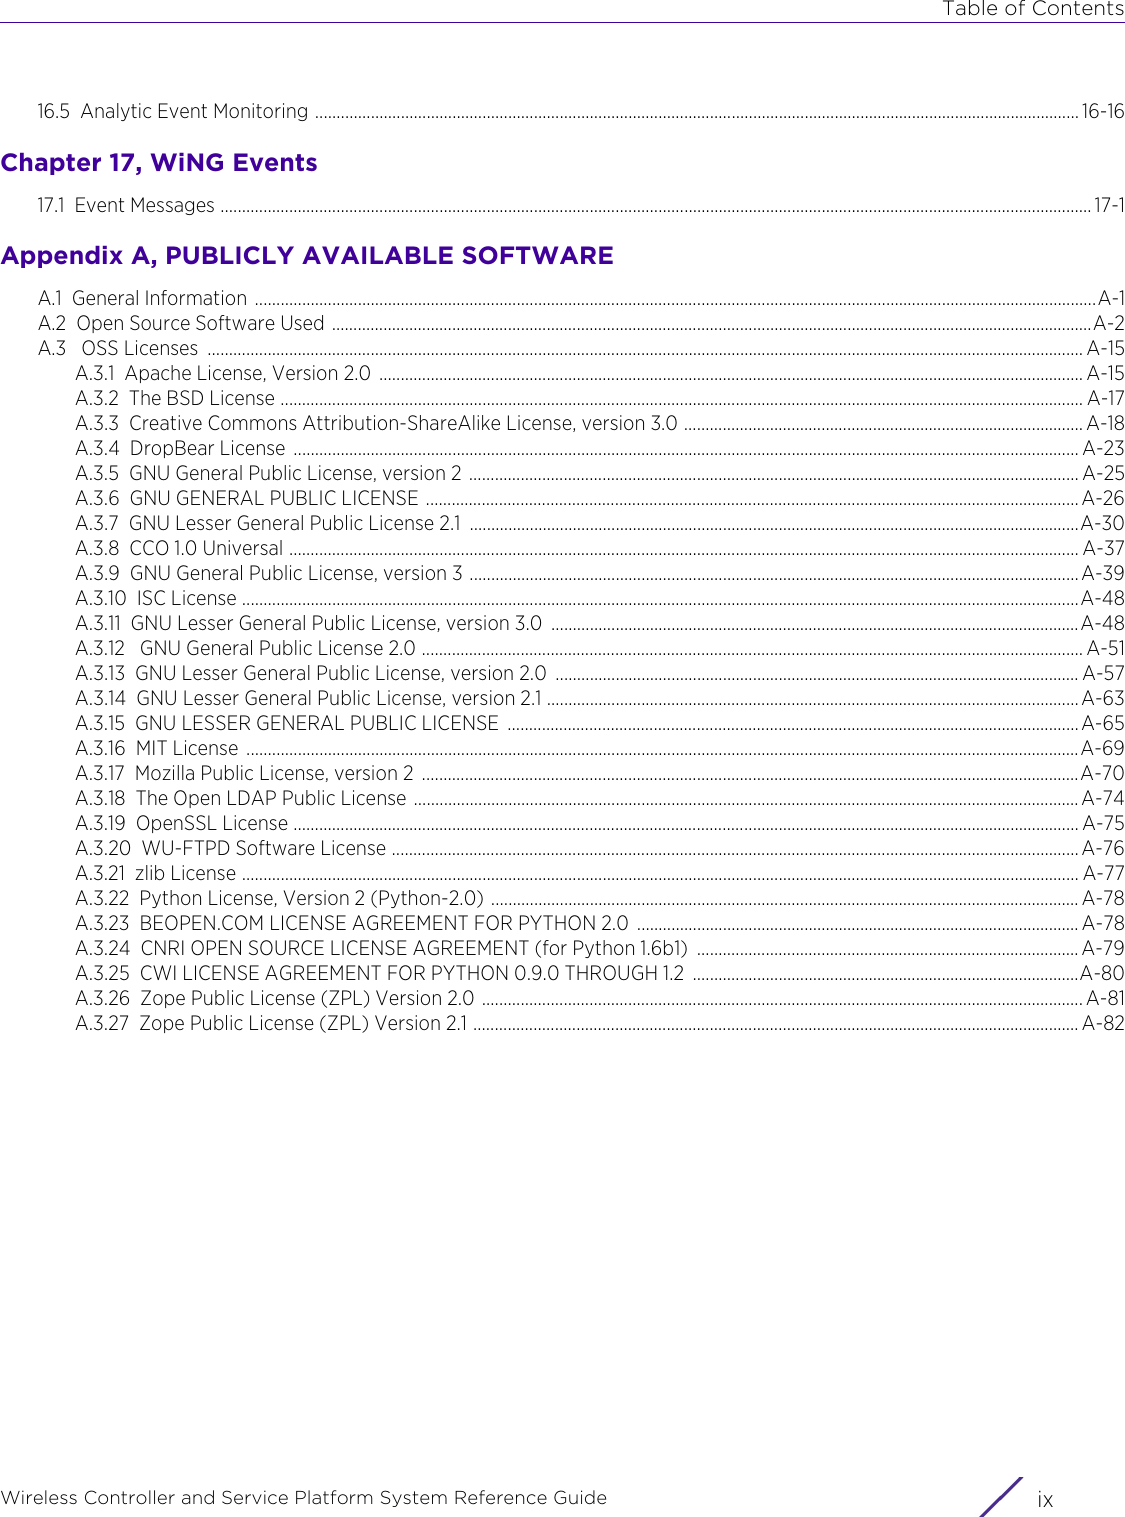 Table of ContentsWireless Controller and Service Platform System Reference Guide ix16.5 Analytic Event Monitoring .................................................................................................................................................................................. 16-16Chapter 17, WiNG Events17.1 Event Messages ........................................................................................................................................................................................................... 17-1Appendix A, PUBLICLY AVAILABLE SOFTWAREA.1 General Information ....................................................................................................................................................................................................A-1A.2 Open Source Software Used .................................................................................................................................................................................A-2A.3  OSS Licenses  ............................................................................................................................................................................................................ A-15A.3.1 Apache License, Version 2.0  .................................................................................................................................................................... A-15A.3.2 The BSD License ........................................................................................................................................................................................... A-17A.3.3 Creative Commons Attribution-ShareAlike License, version 3.0 ............................................................................................. A-18A.3.4 DropBear License  ....................................................................................................................................................................................... A-23A.3.5 GNU General Public License, version 2 .............................................................................................................................................. A-25A.3.6 GNU GENERAL PUBLIC LICENSE  ........................................................................................................................................................ A-26A.3.7 GNU Lesser General Public License 2.1  ..............................................................................................................................................A-30A.3.8 CCO 1.0 Universal ........................................................................................................................................................................................ A-37A.3.9 GNU General Public License, version 3 ..............................................................................................................................................A-39A.3.10 ISC License ...................................................................................................................................................................................................A-48A.3.11 GNU Lesser General Public License, version 3.0 ...........................................................................................................................A-48A.3.12  GNU General Public License 2.0 .......................................................................................................................................................... A-51A.3.13 GNU Lesser General Public License, version 2.0 .......................................................................................................................... A-57A.3.14 GNU Lesser General Public License, version 2.1 ............................................................................................................................A-63A.3.15 GNU LESSER GENERAL PUBLIC LICENSE  .....................................................................................................................................A-65A.3.16 MIT License  ..................................................................................................................................................................................................A-69A.3.17 Mozilla Public License, version 2  .........................................................................................................................................................A-70A.3.18 The Open LDAP Public License ...........................................................................................................................................................A-74A.3.19 OpenSSL License ....................................................................................................................................................................................... A-75A.3.20 WU-FTPD Software License ................................................................................................................................................................ A-76A.3.21 zlib License ................................................................................................................................................................................................... A-77A.3.22 Python License, Version 2 (Python-2.0) ......................................................................................................................................... A-78A.3.23 BEOPEN.COM LICENSE AGREEMENT FOR PYTHON 2.0  ....................................................................................................... A-78A.3.24 CNRI OPEN SOURCE LICENSE AGREEMENT (for Python 1.6b1)  ......................................................................................... A-79A.3.25 CWI LICENSE AGREEMENT FOR PYTHON 0.9.0 THROUGH 1.2  ..........................................................................................A-80A.3.26 Zope Public License (ZPL) Version 2.0 ............................................................................................................................................ A-81A.3.27 Zope Public License (ZPL) Version 2.1 ............................................................................................................................................. A-82